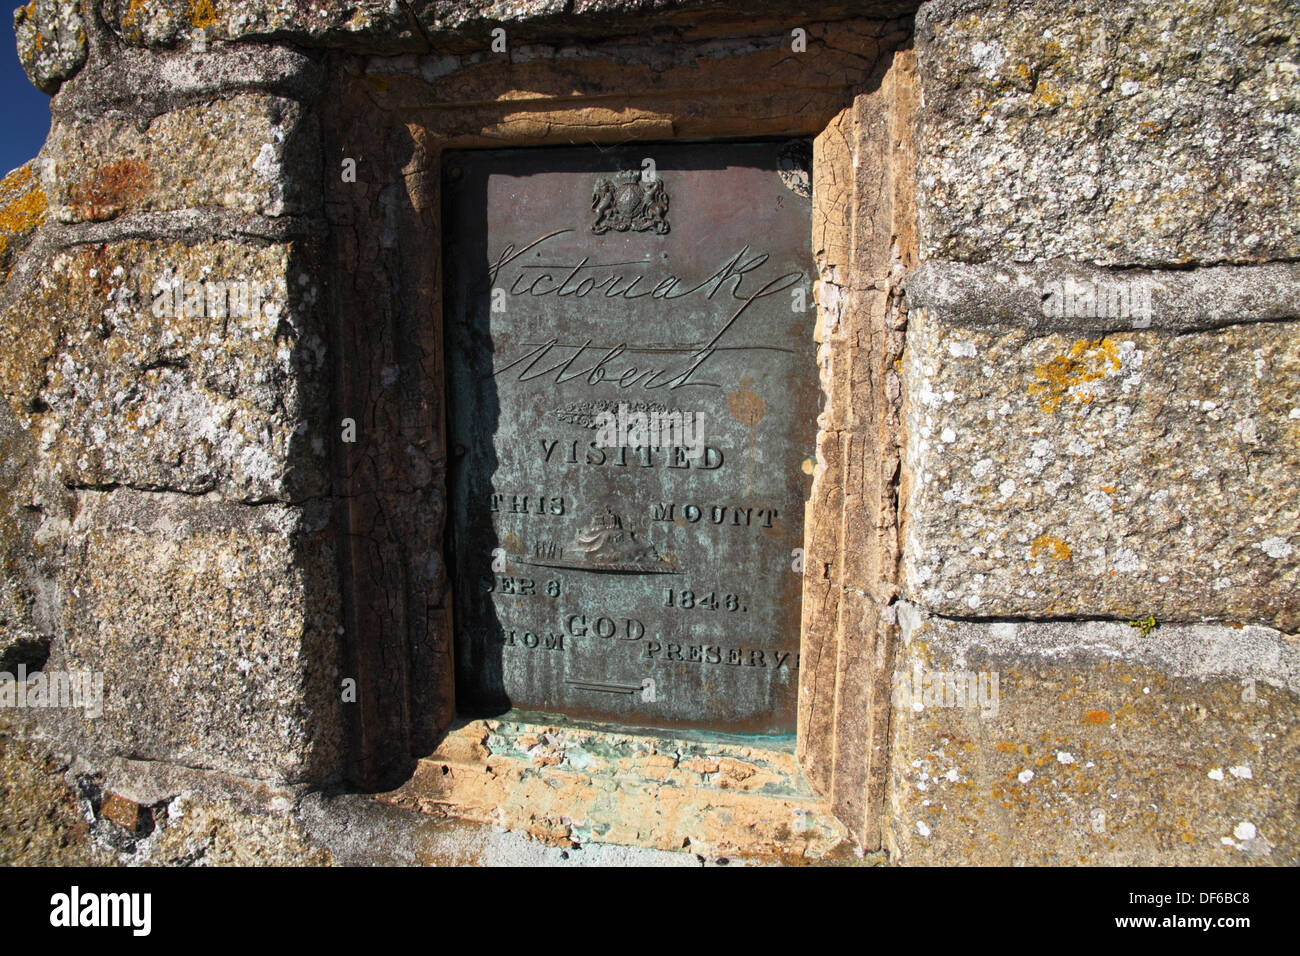 Bronze plaque commemorating visit of Queen Victoria and Prince Albert to St Michael's Mount, Sept 6th 1846. Stock Photo